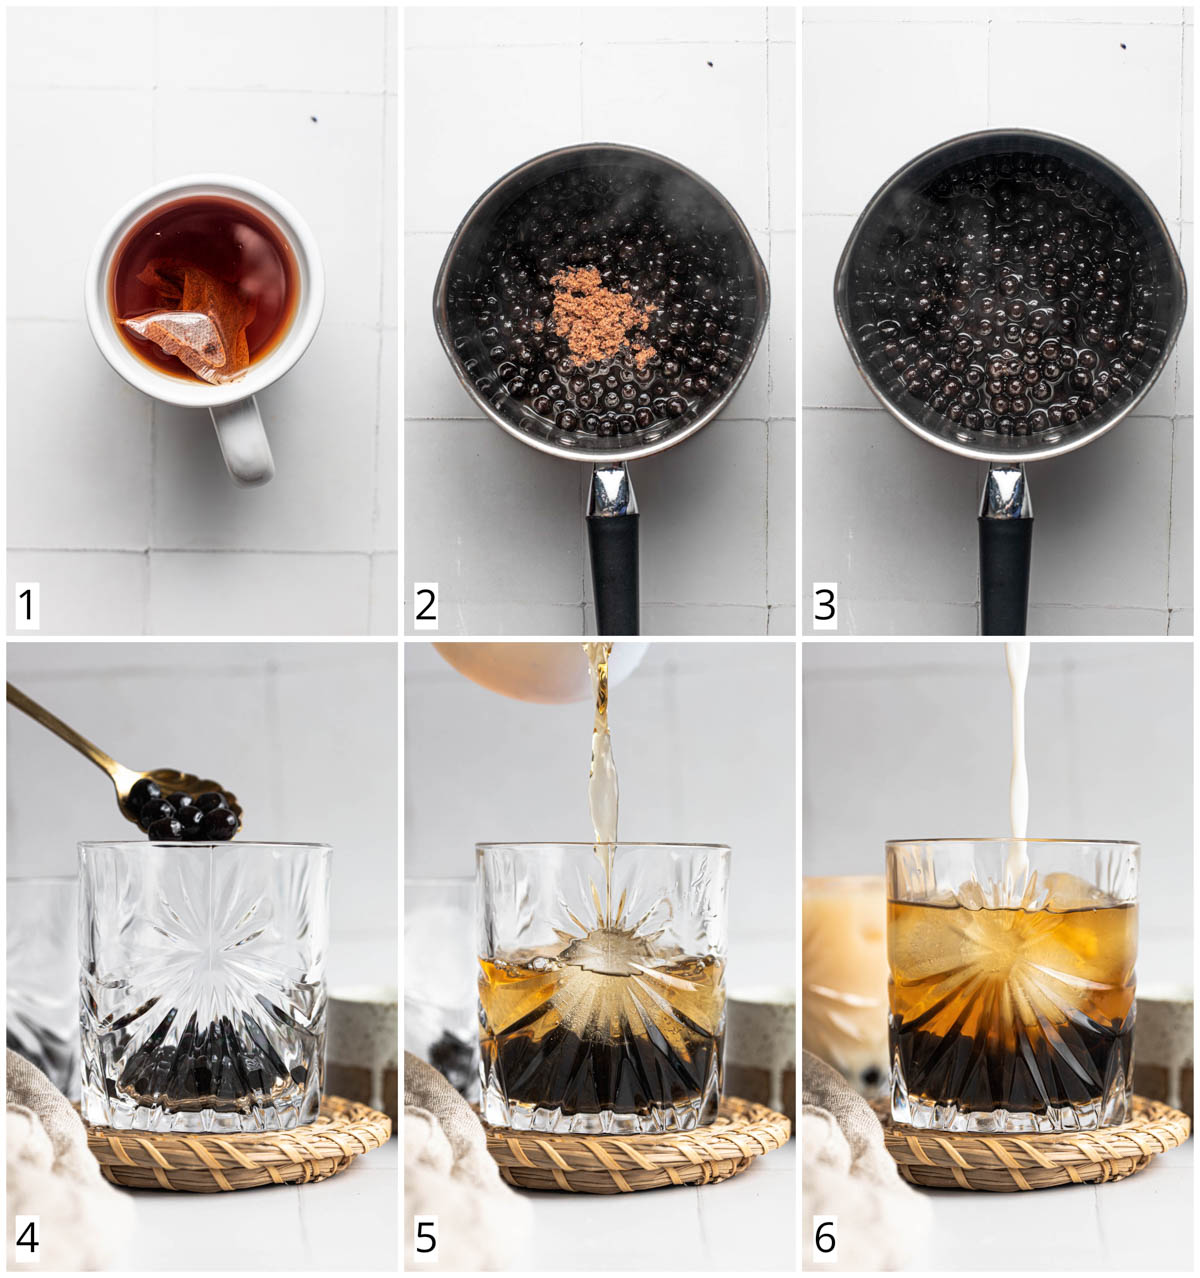 A collage of six images showing all the steps in making bubble tea.